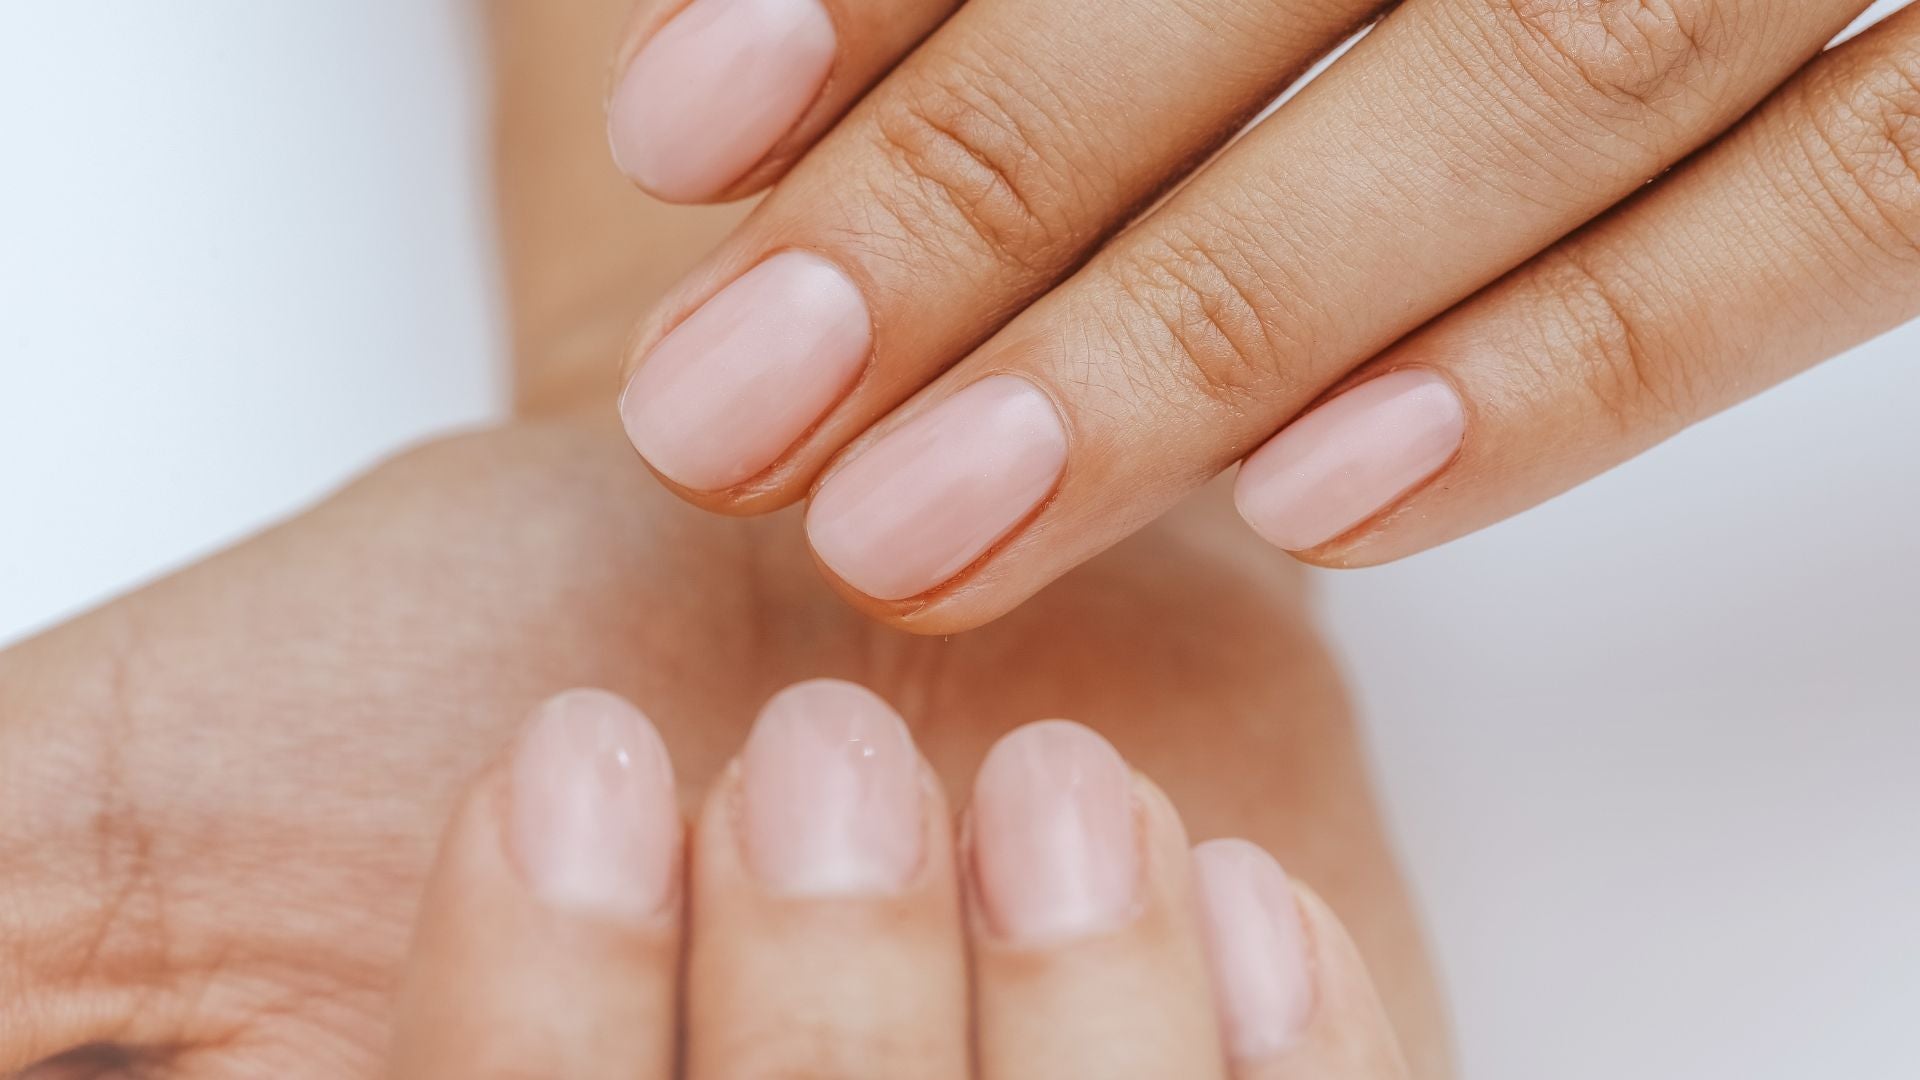 Is Argan Oil Good For Your Nails?